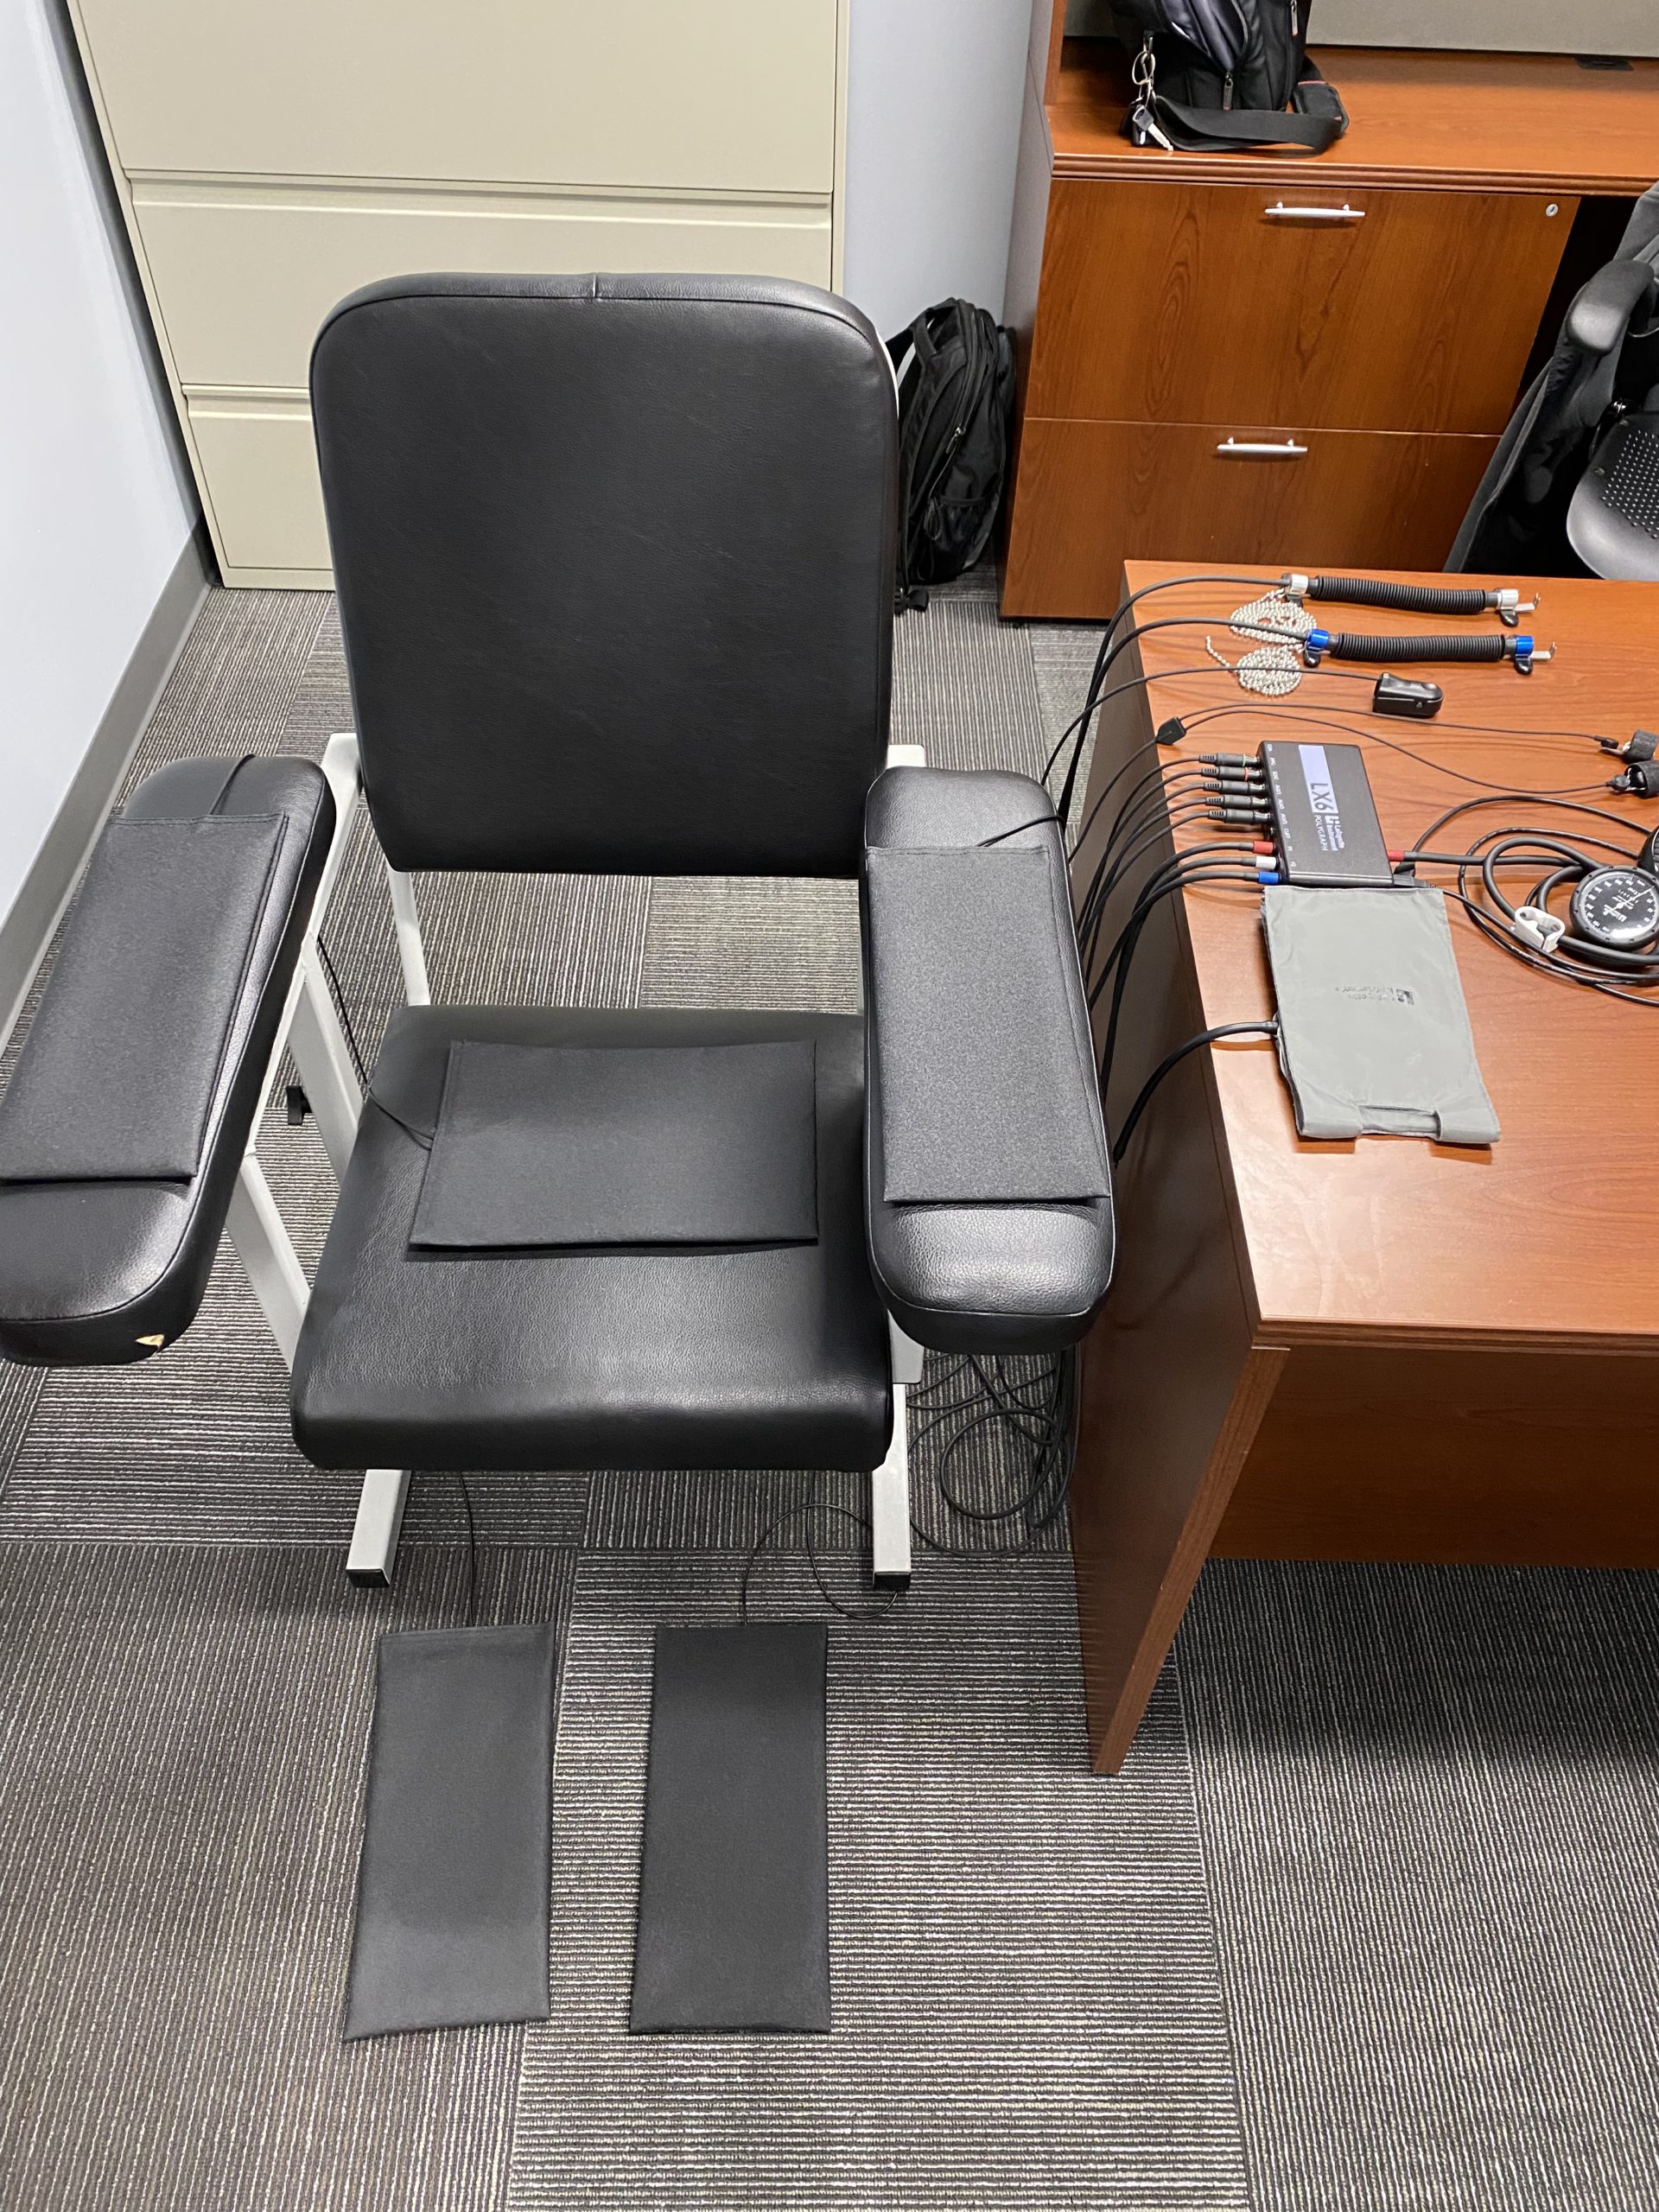 Chair with polygraph equipment around and on it.